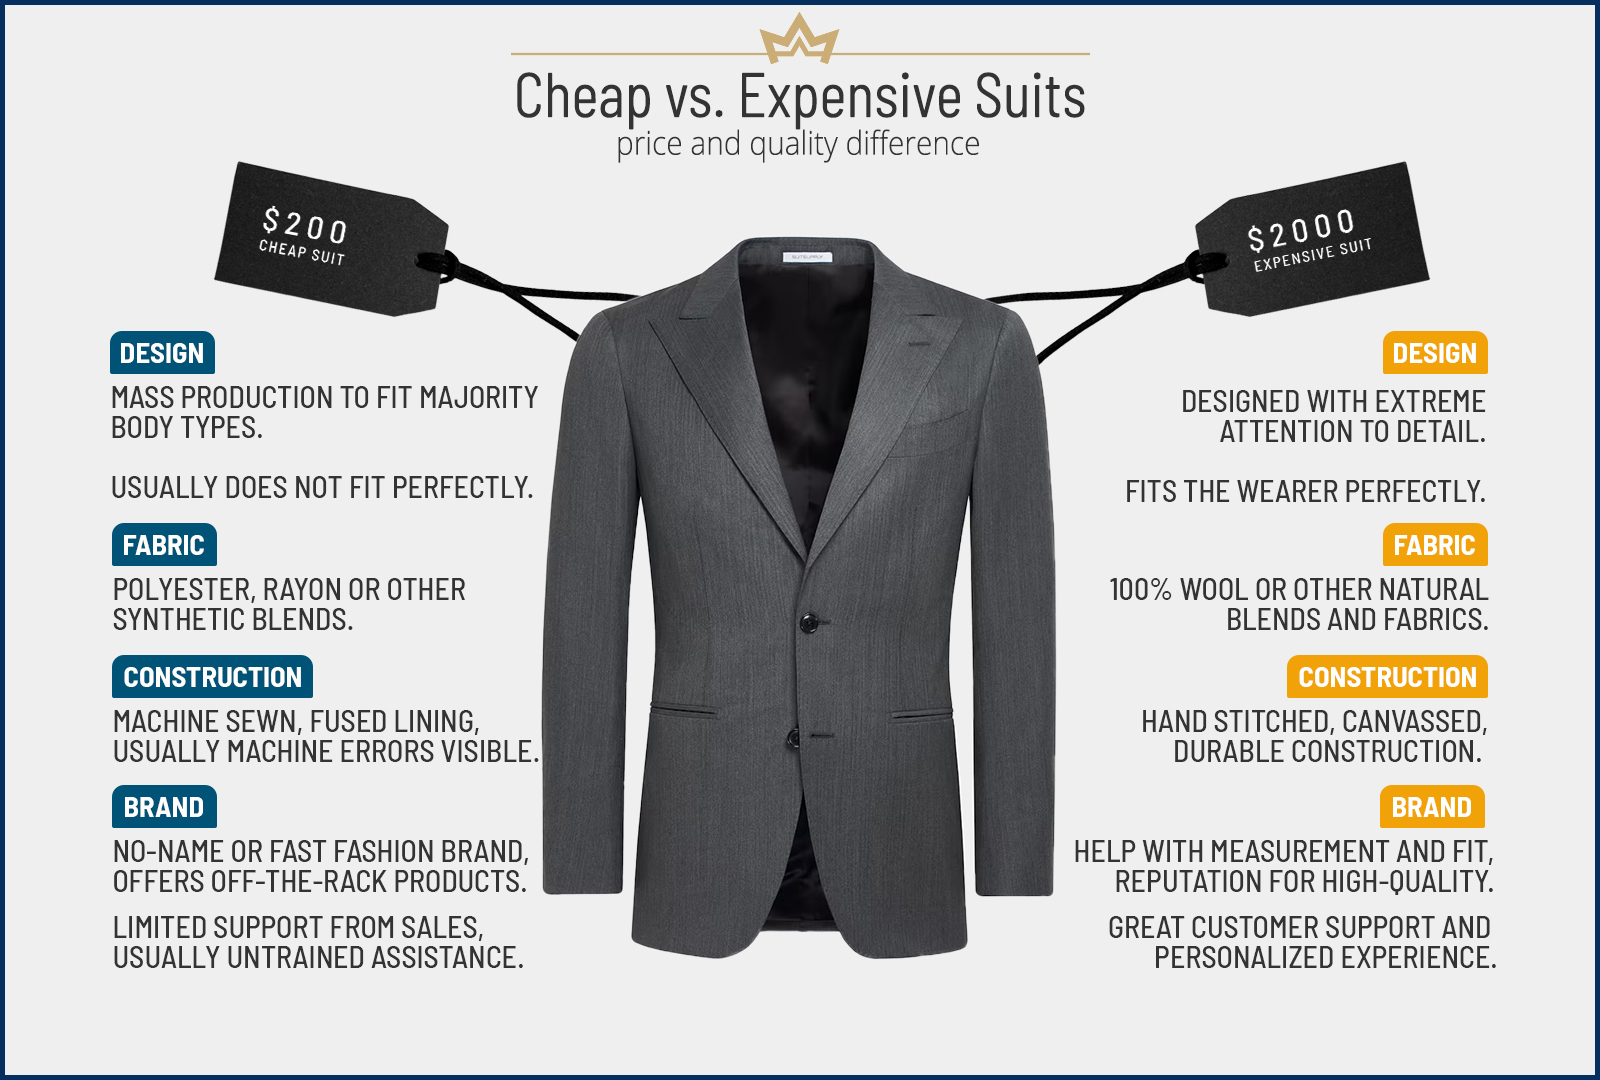 Cheap suit vs. expensive suit: cost and product differences